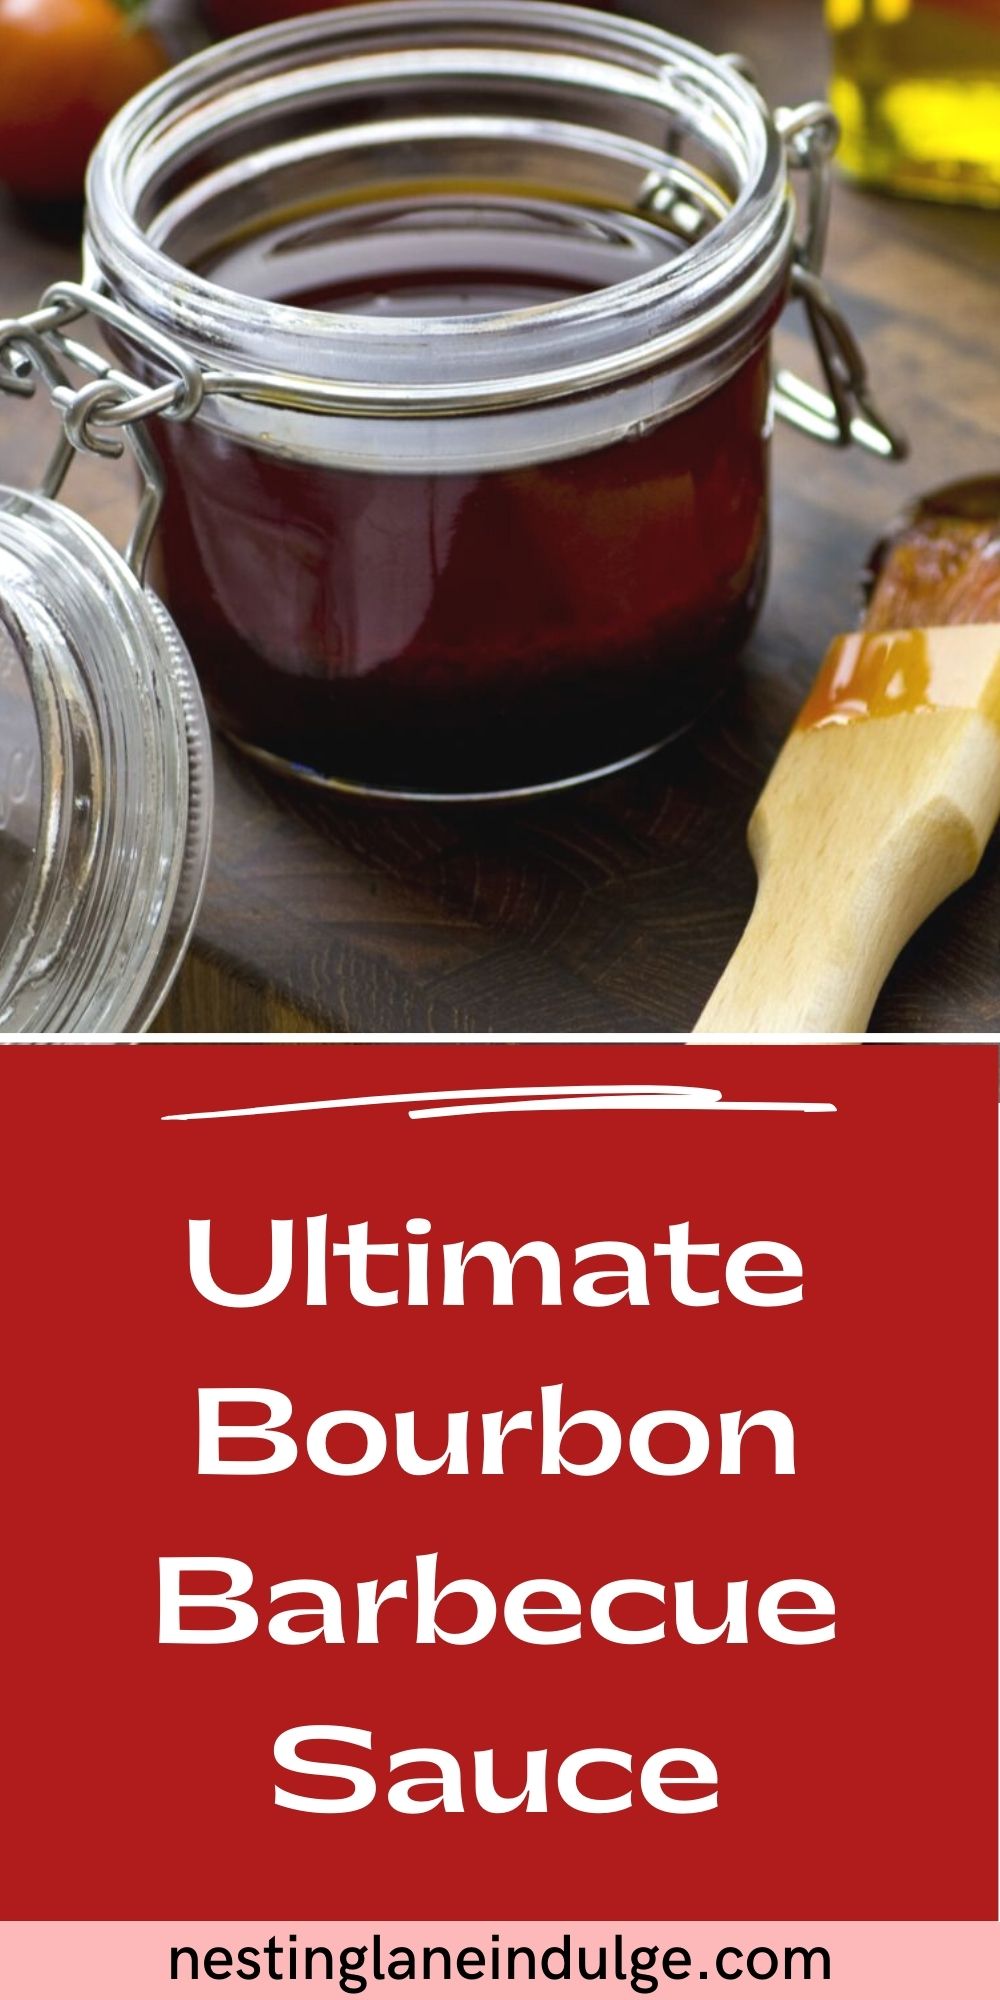 Graphic for Pinterest of Ultimate Bourbon Barbecue Sauce Recipe.